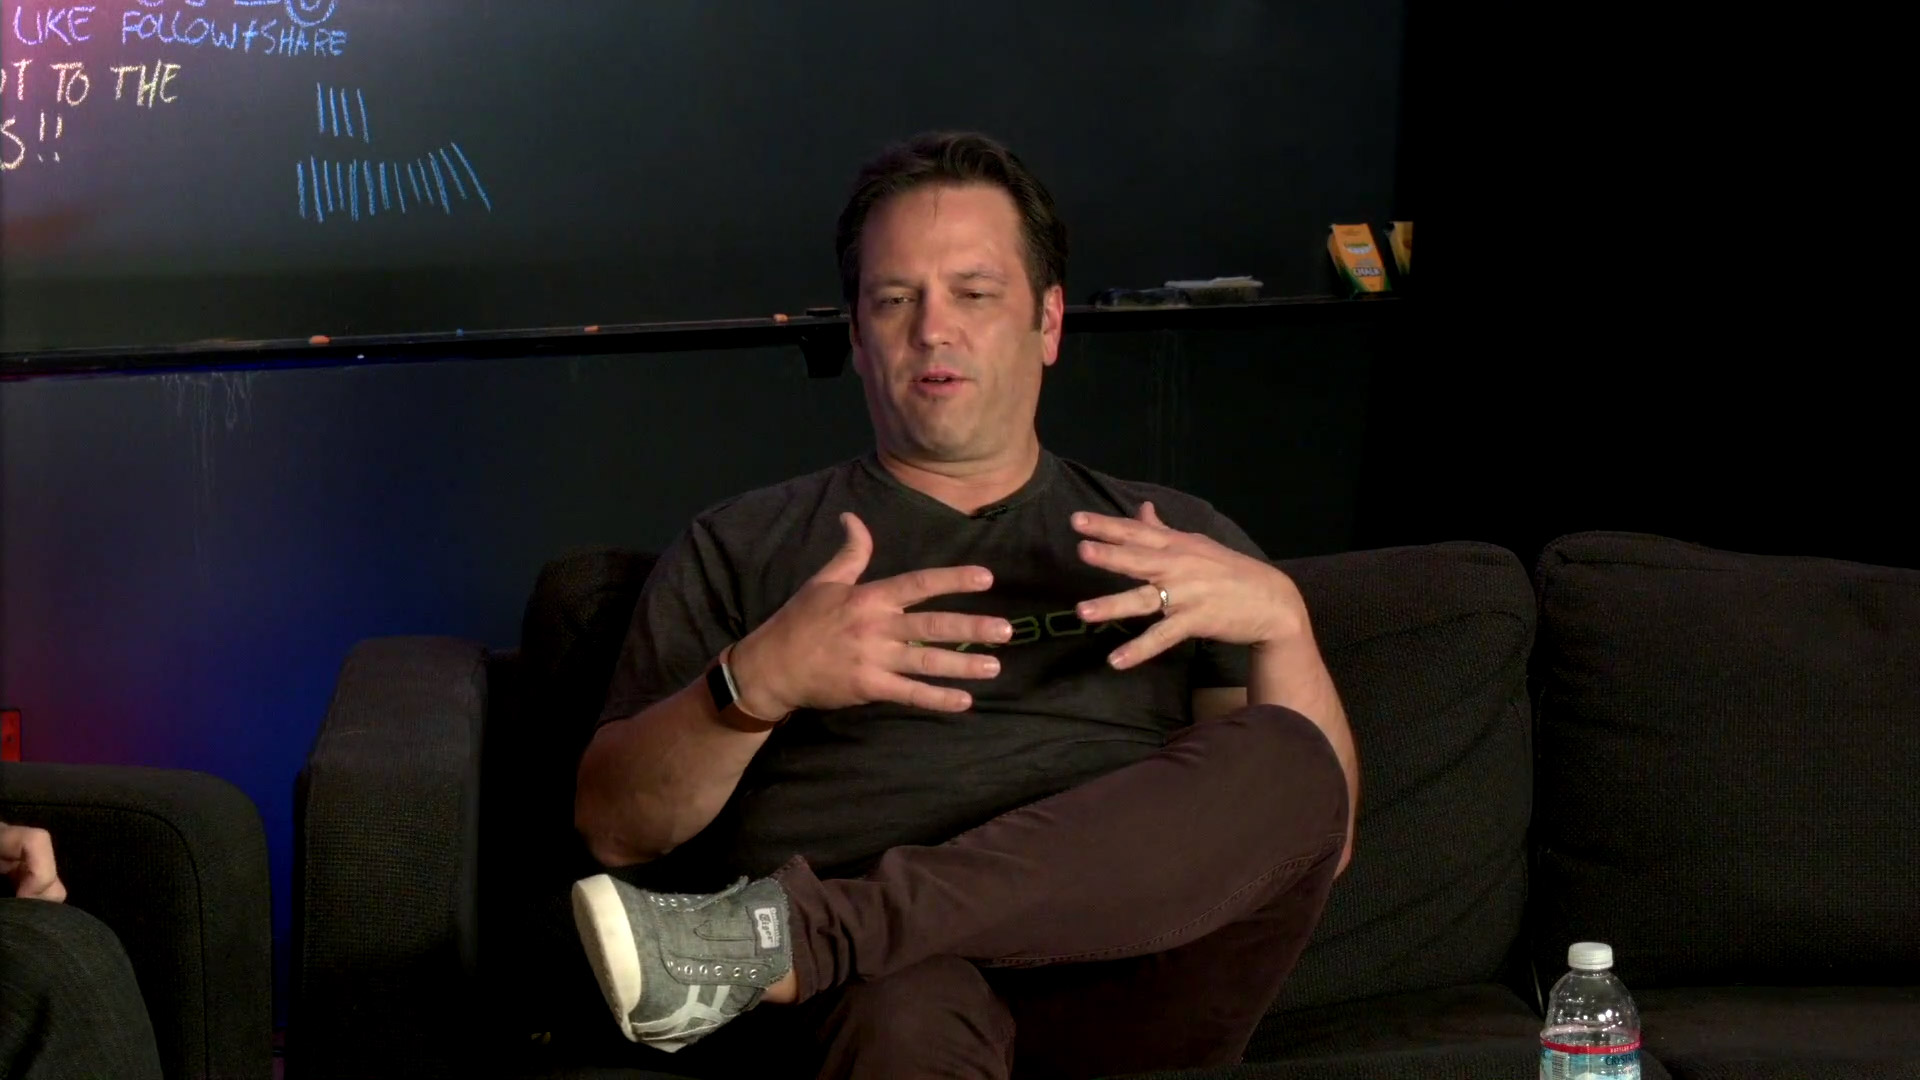 Phil Spencer says he 'doesn't envision' a time when every Xbox